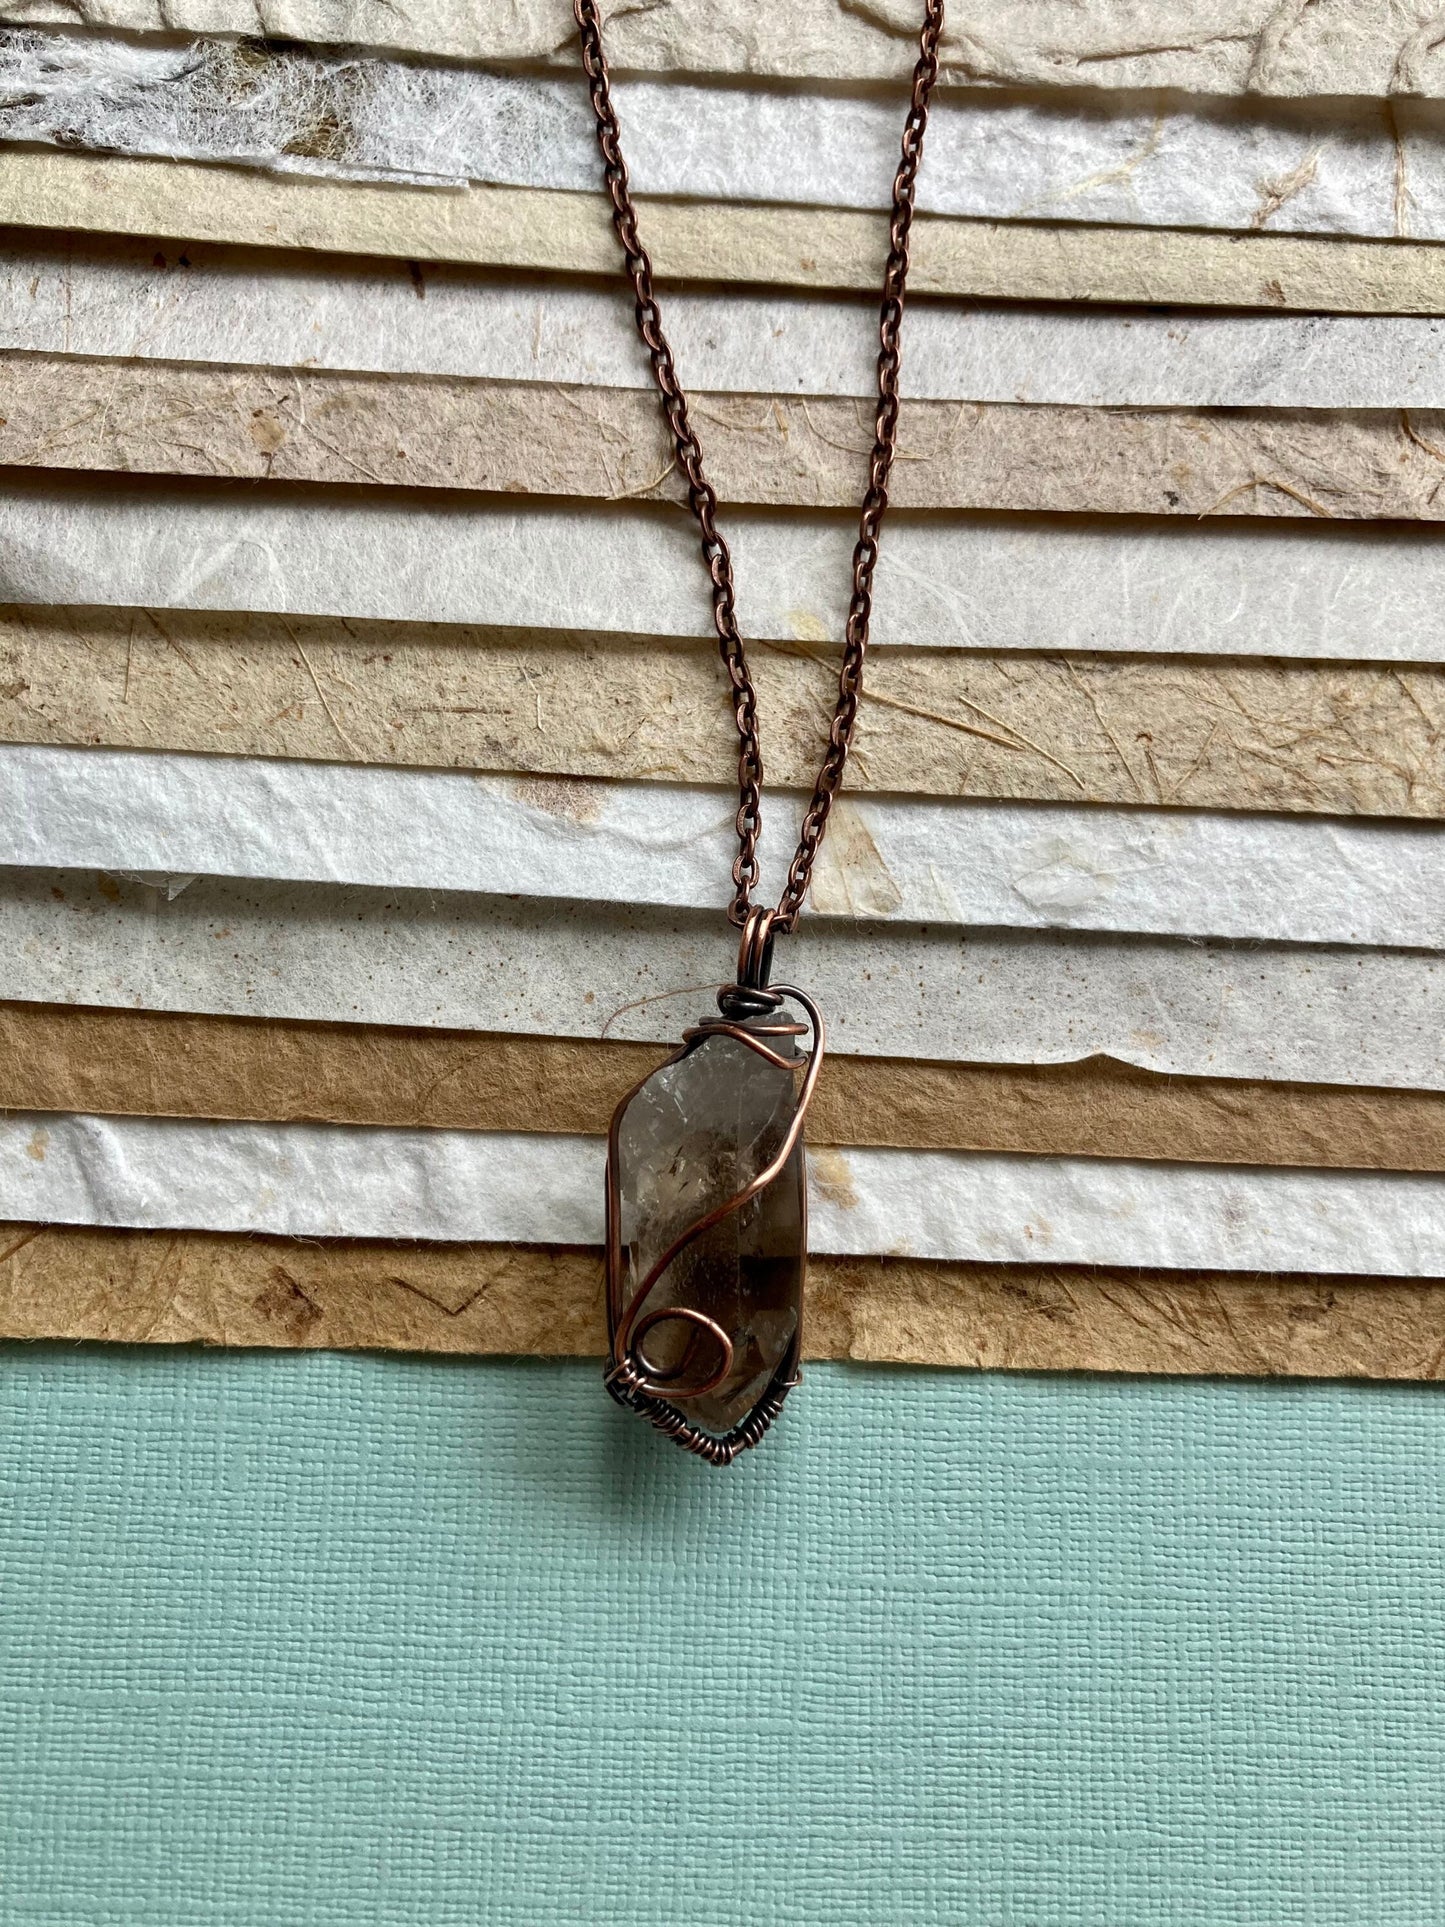 Smoky Quartz pendant handmade necklace wire wrapped natural stone with 18 inch length chain